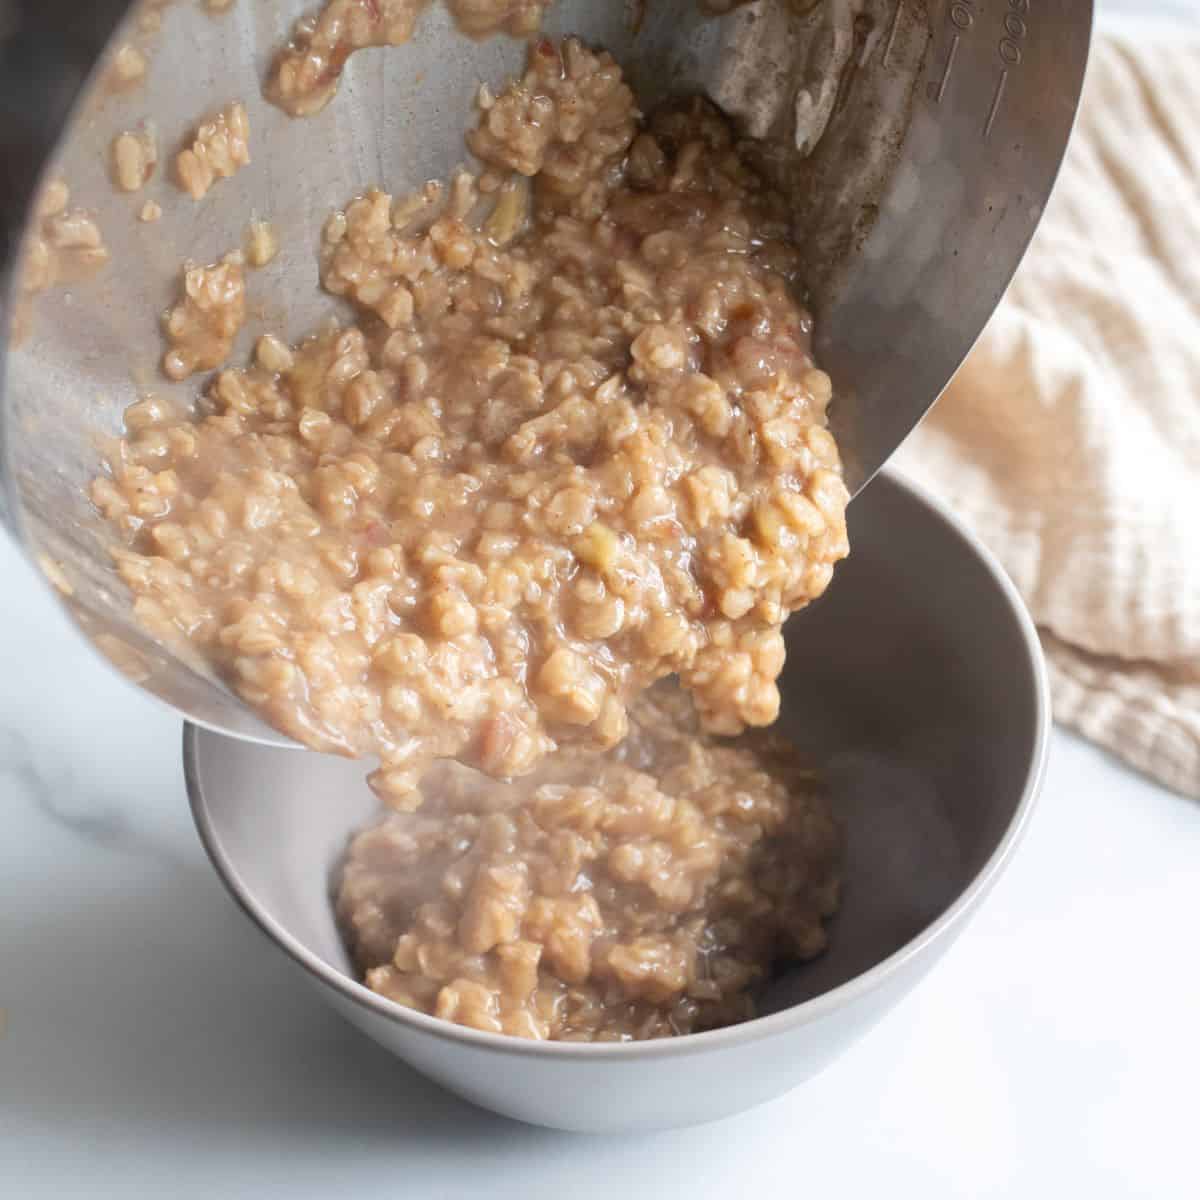 Date oatmeal pouring into a bowl from a metal pot.